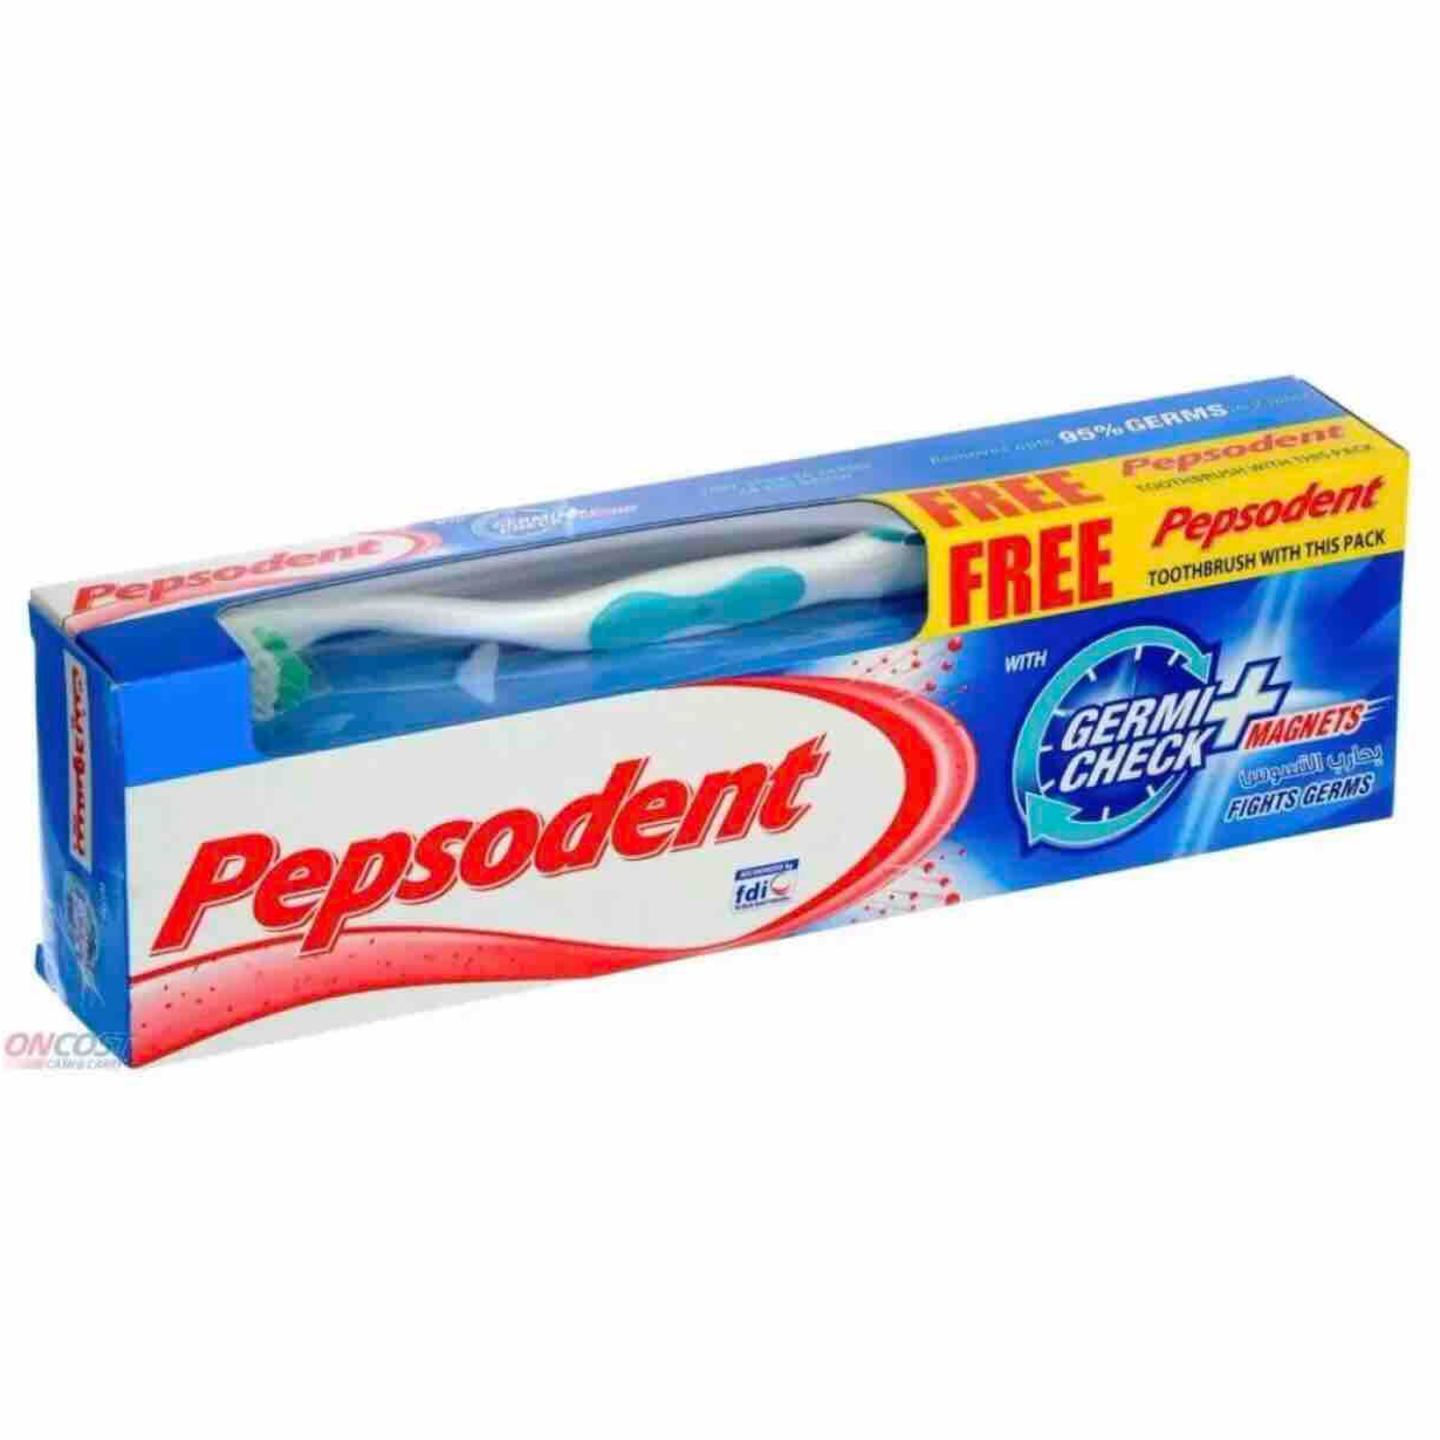 Pespsodent Germi Check Toothpaste 150g